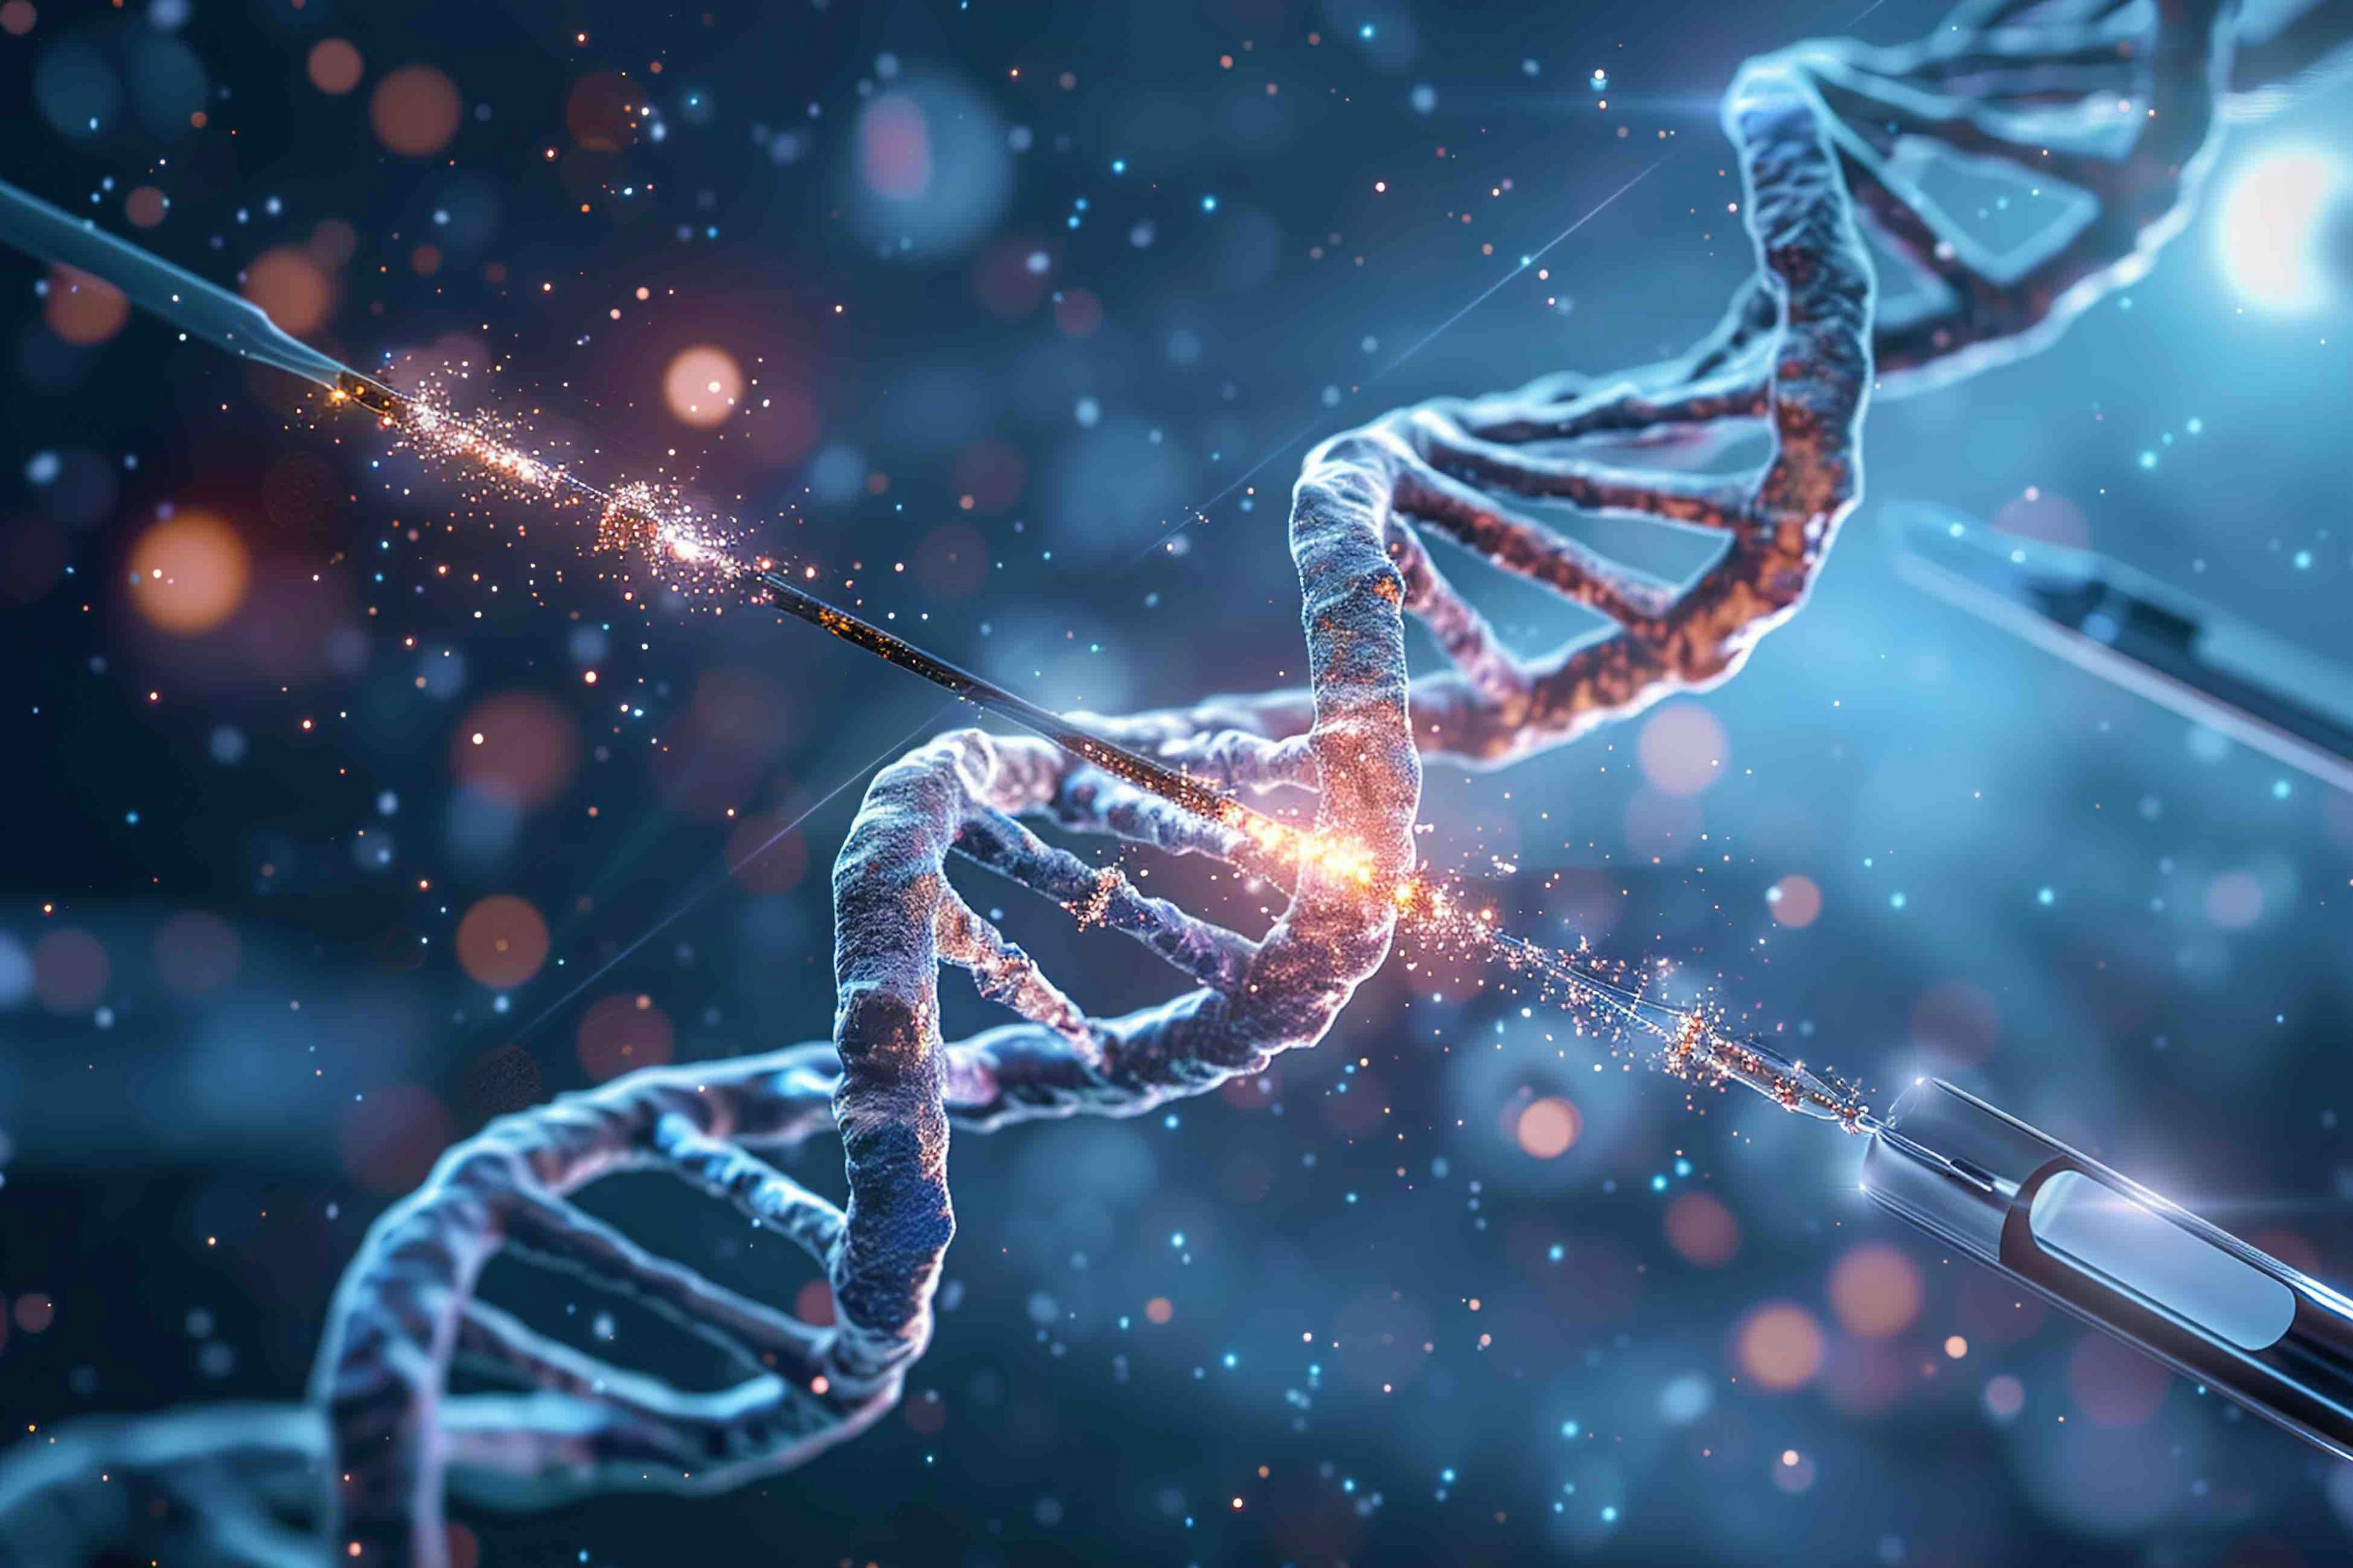 Gene editing shows promise in Duchenne muscular dystrophy. | Image credit: Degimages - stock.adobe.com